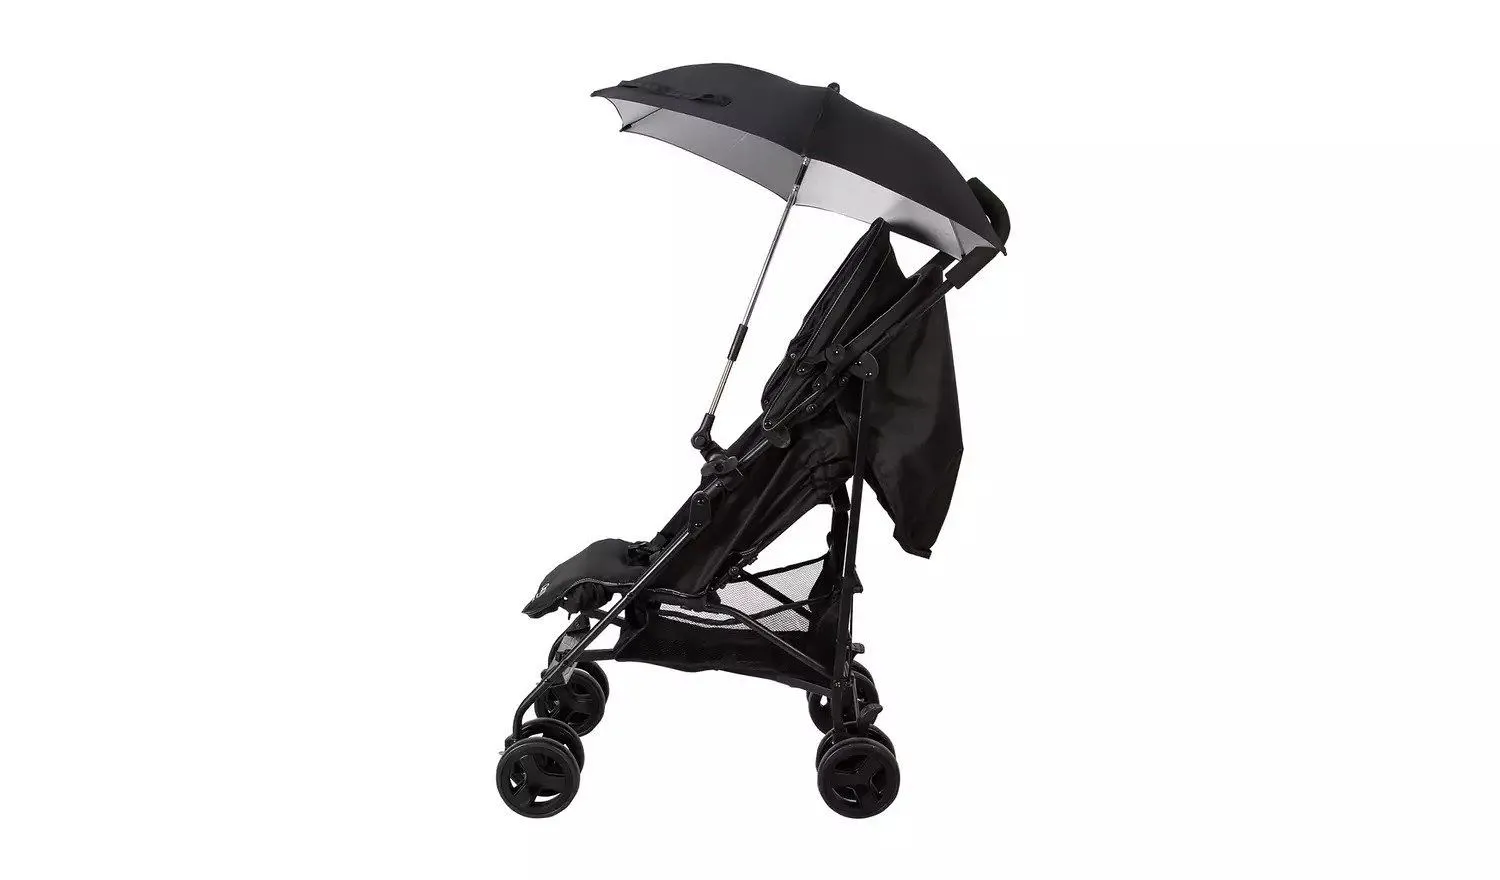 PrimeSportsShop Universal UV Parasol Sun Canopy for Pushchairs and Buggy Clip on Stroller Umbrella Baby Buggy Sun Parasol with Adjustable Fixing Clamp